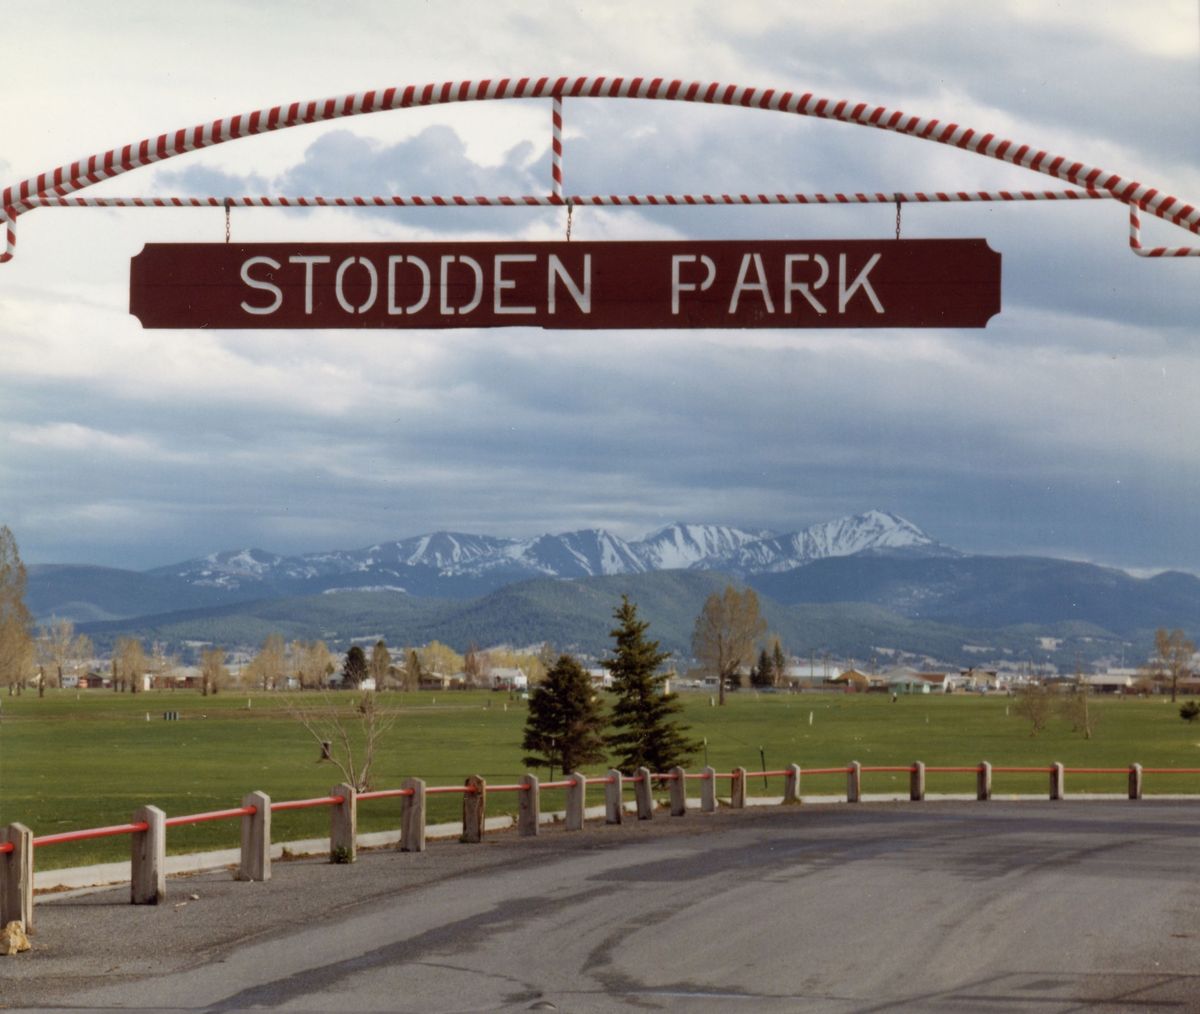 Hike through History - Stodden Park: Then & Now with Jim McCarthy and Bob Lazzari